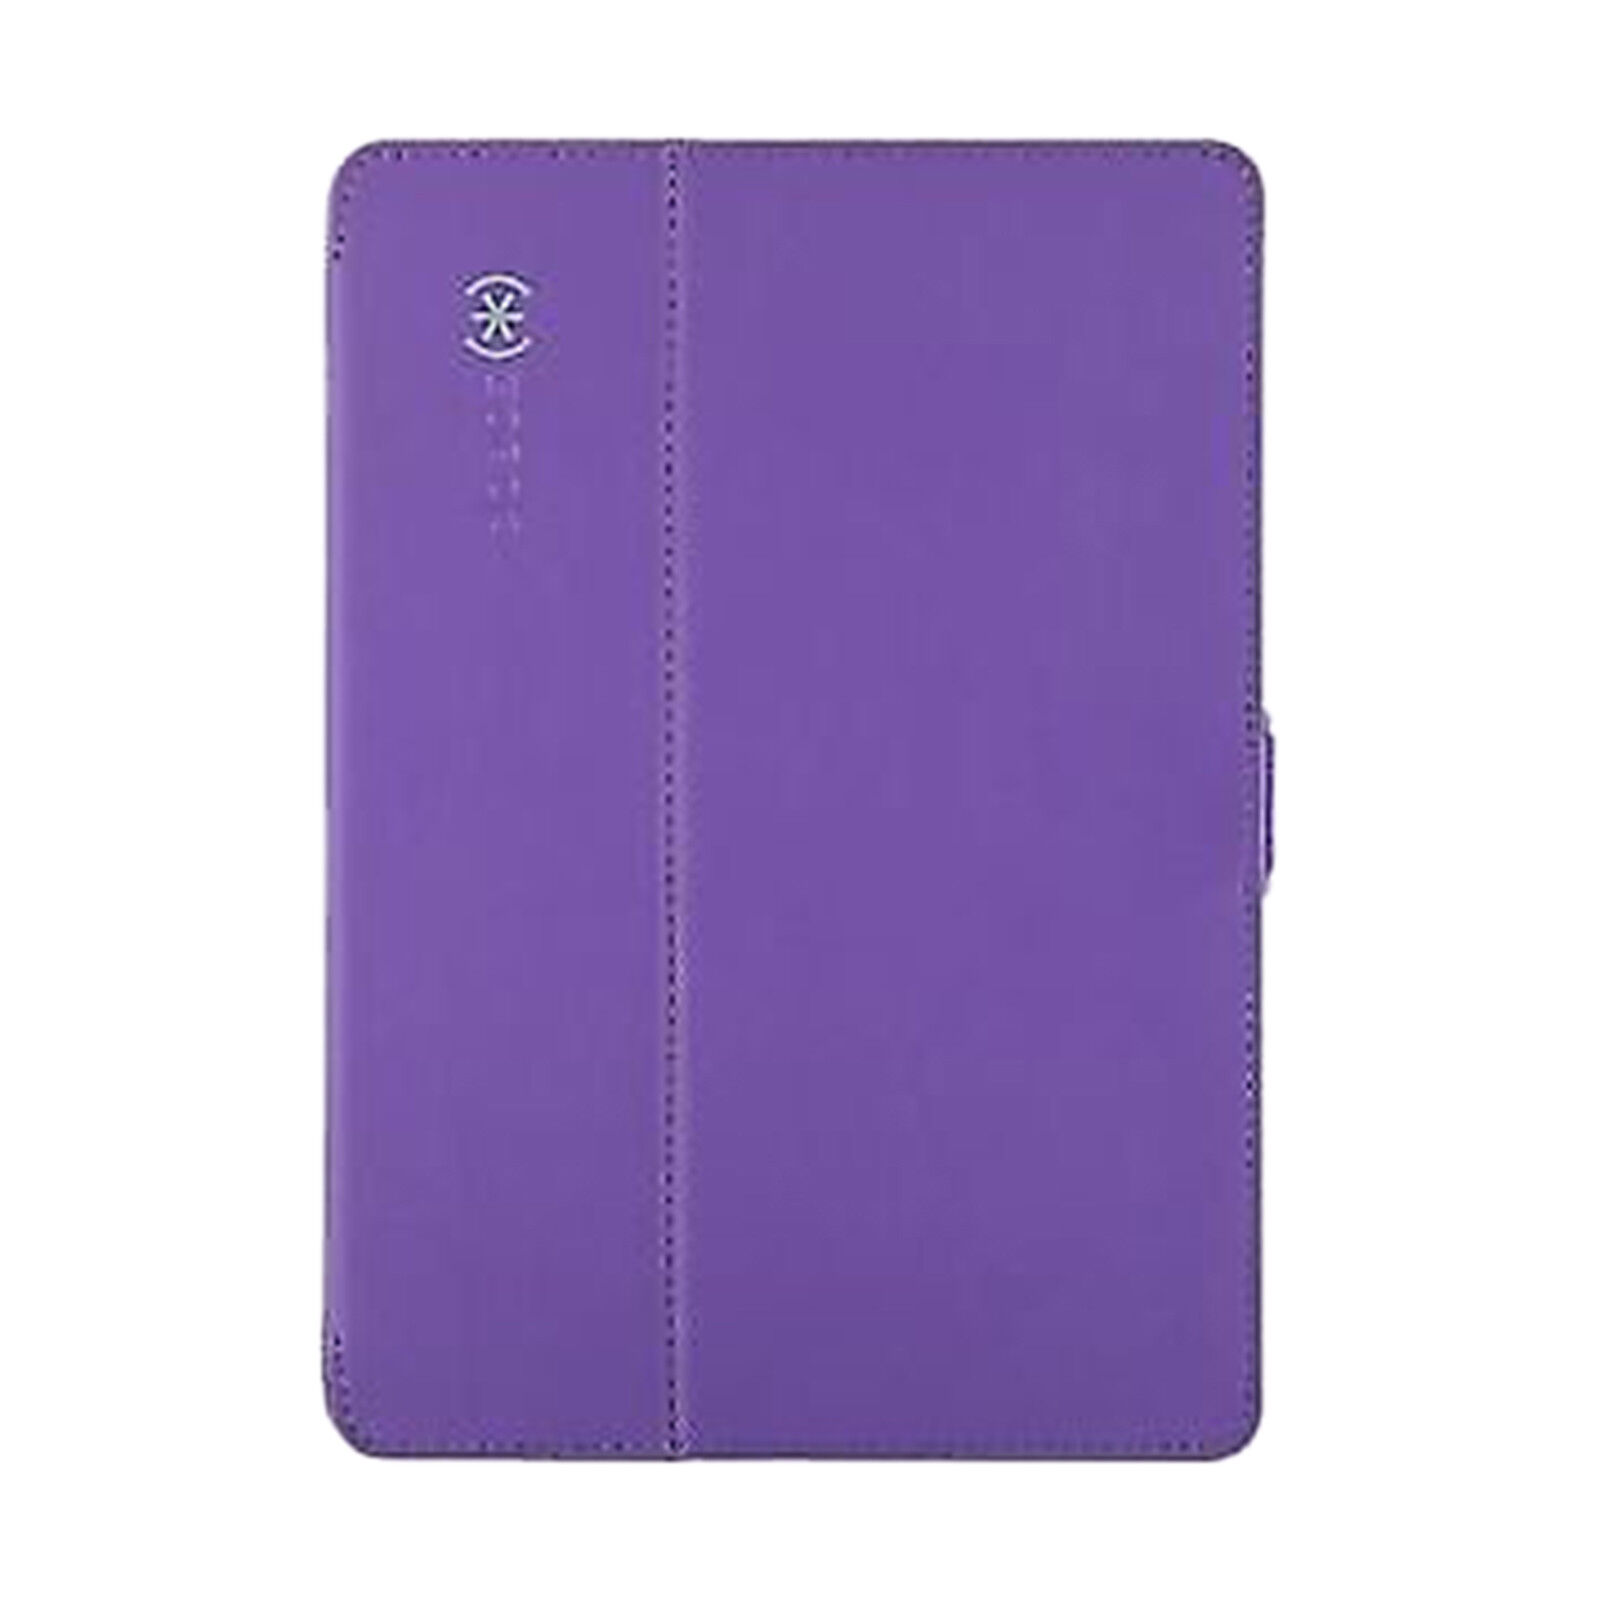 Speck StyleFolio Durable Leather Impact Protection Folio Case For iPad Air